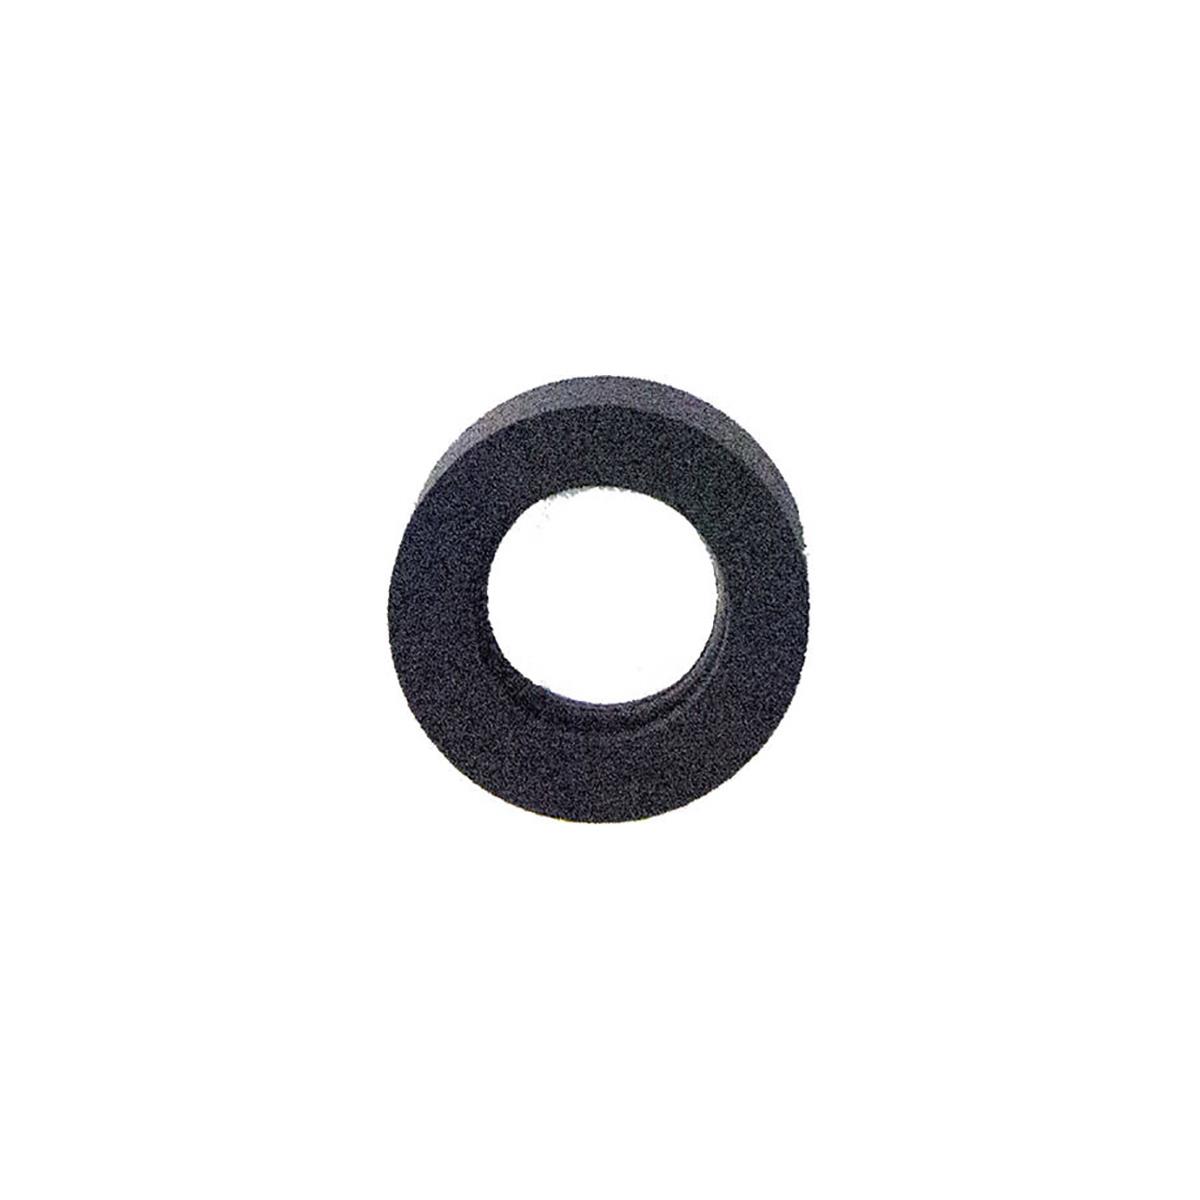 Image of Cinegears Ultra-Friction Rubber Ground Balancing Wheel for Pegasus Kit